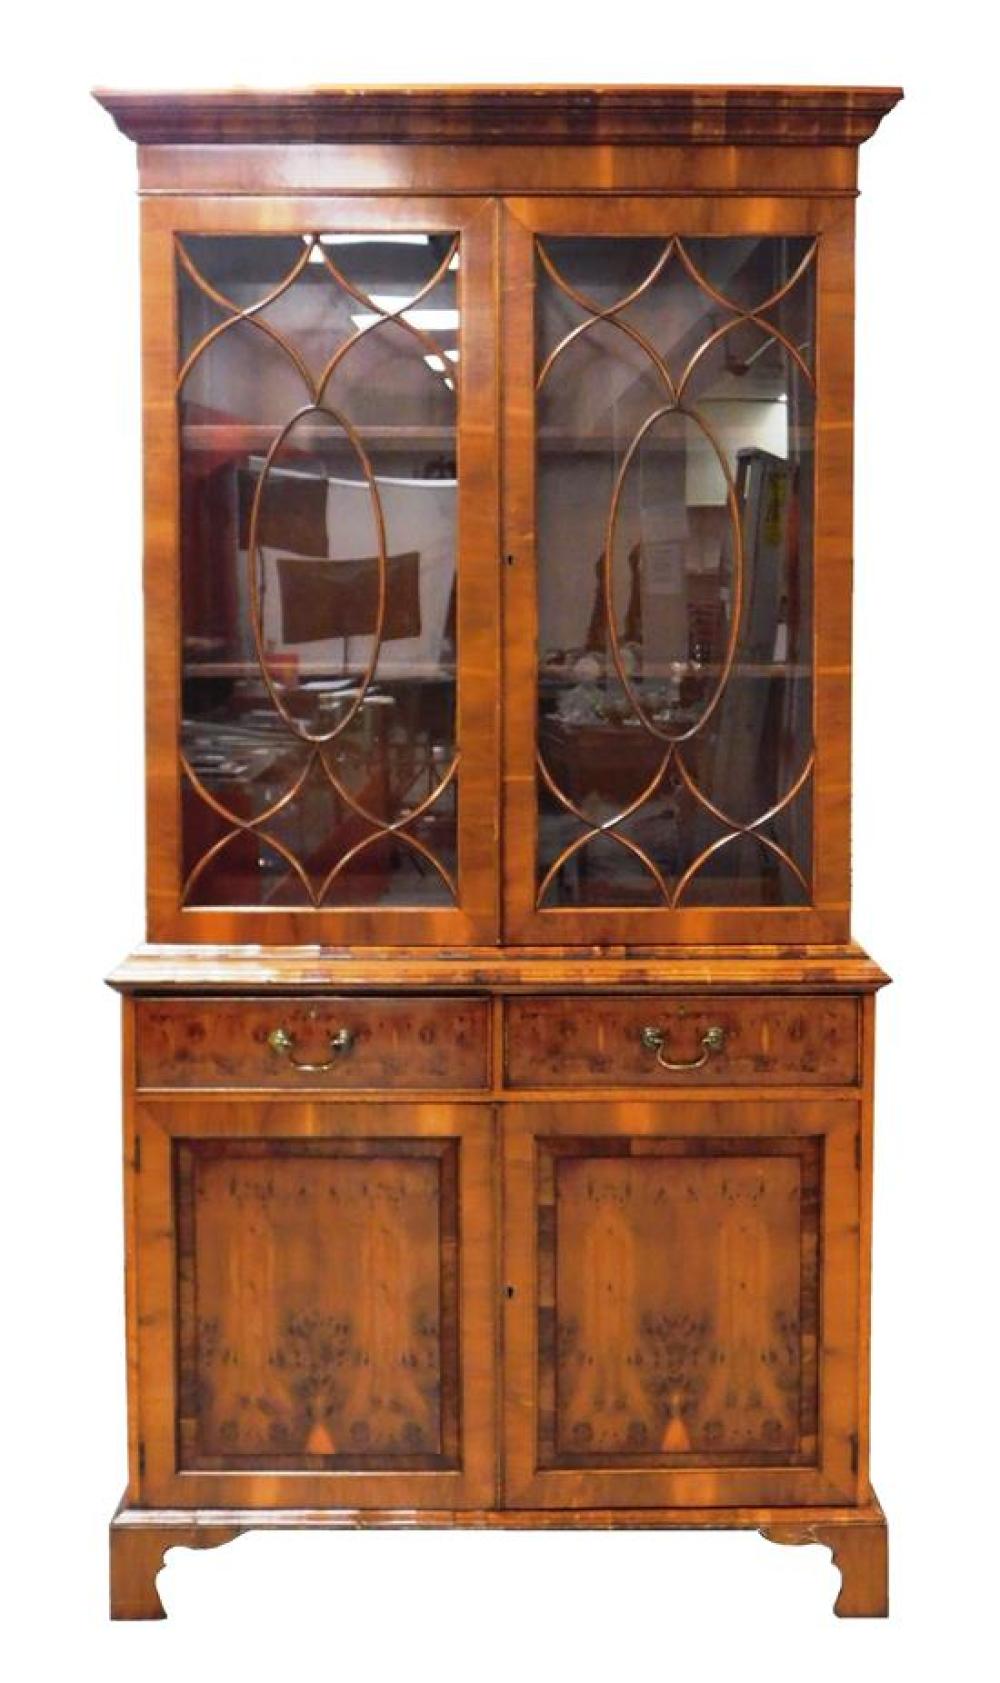 GEORGIAN STYLE GLASS FRONT CABINET 31cccf